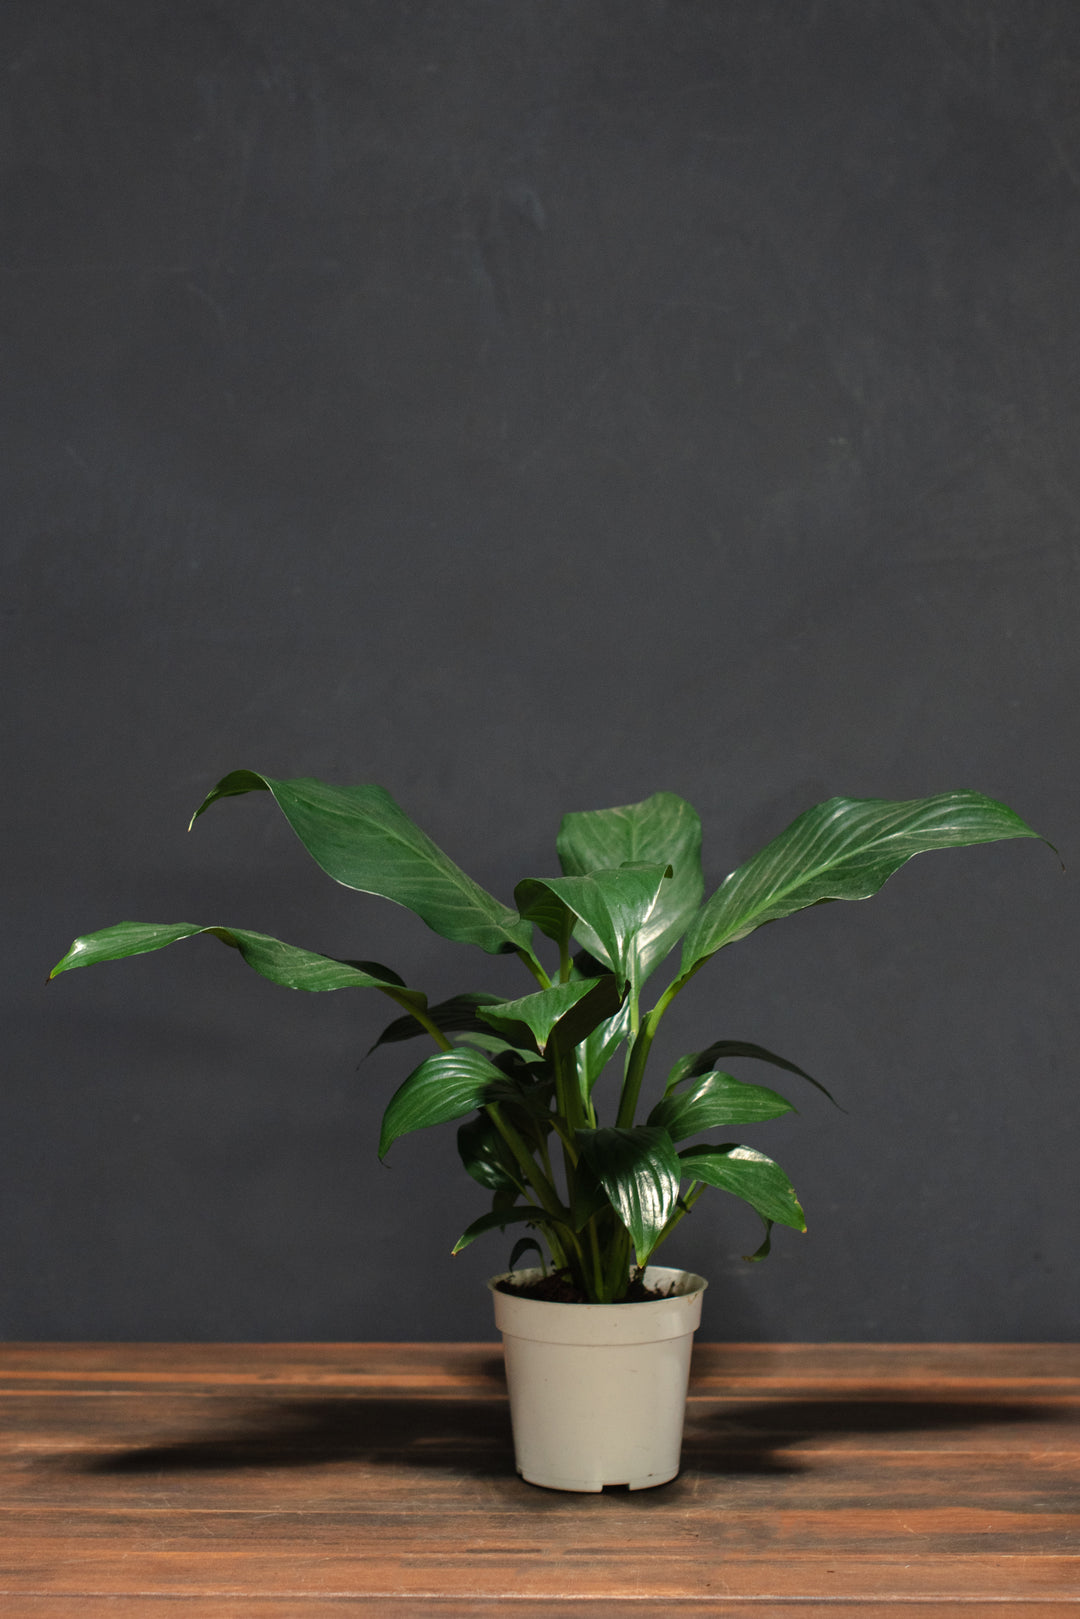 Spathiphyllum "Peace Lily"